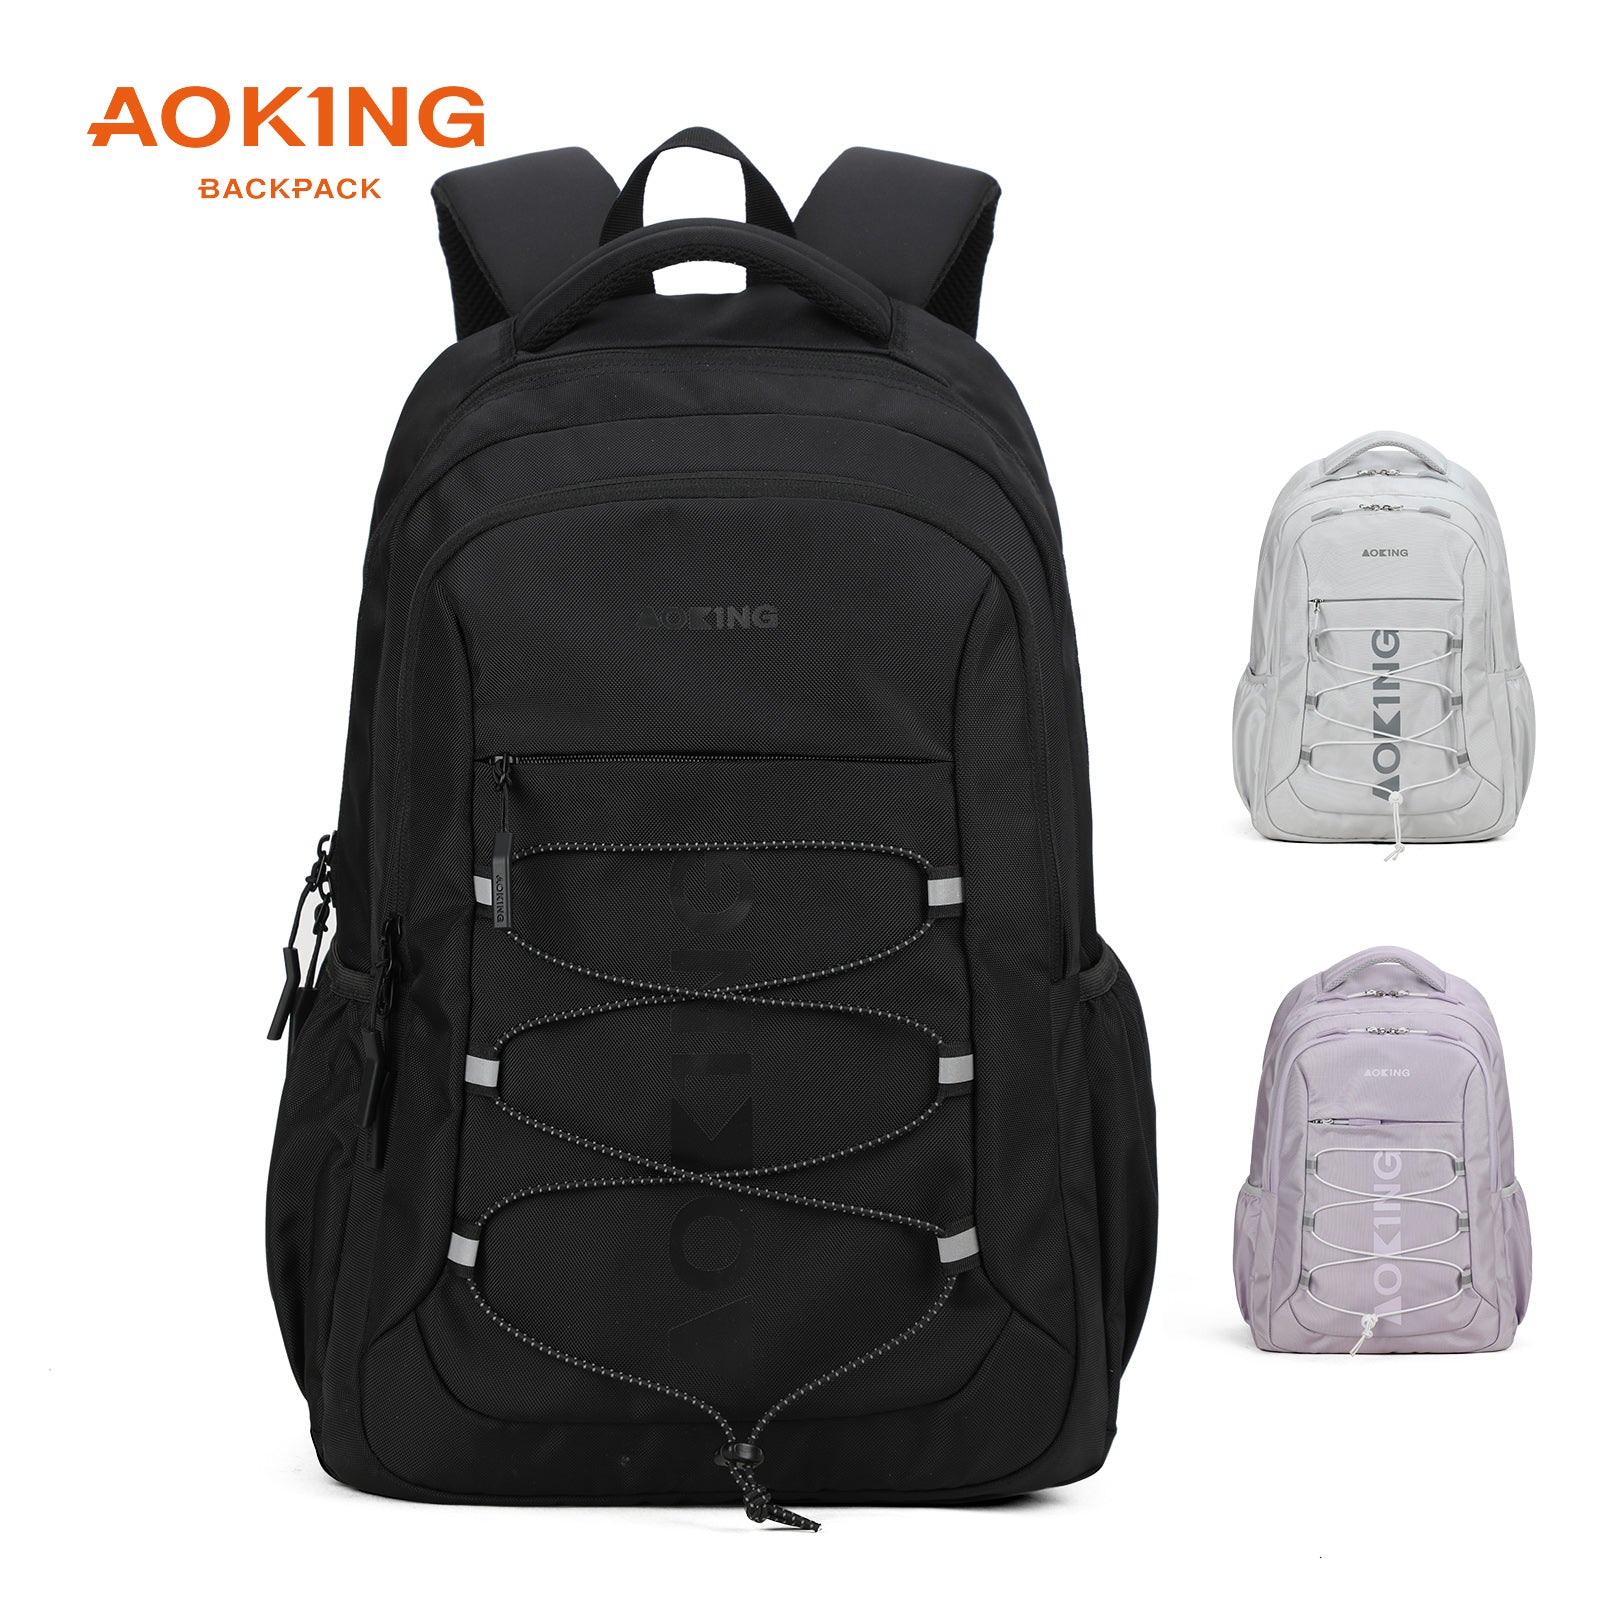 Aoking Backpack White Large Capacity Casual Backpack Student Bag XN3339